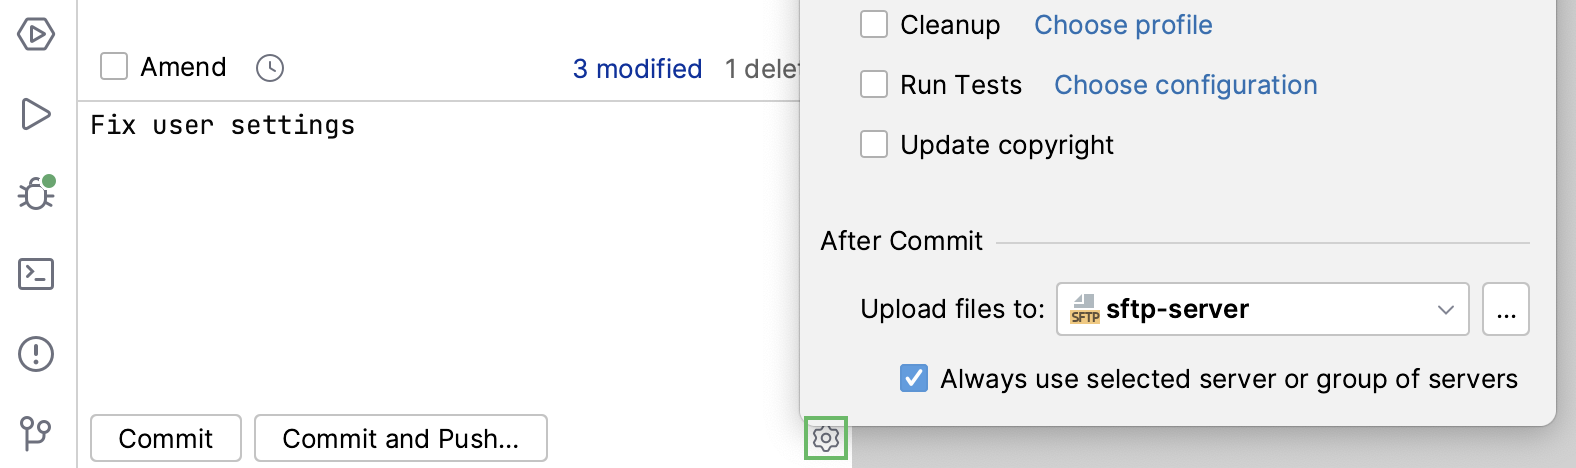 Upload files from after commit area